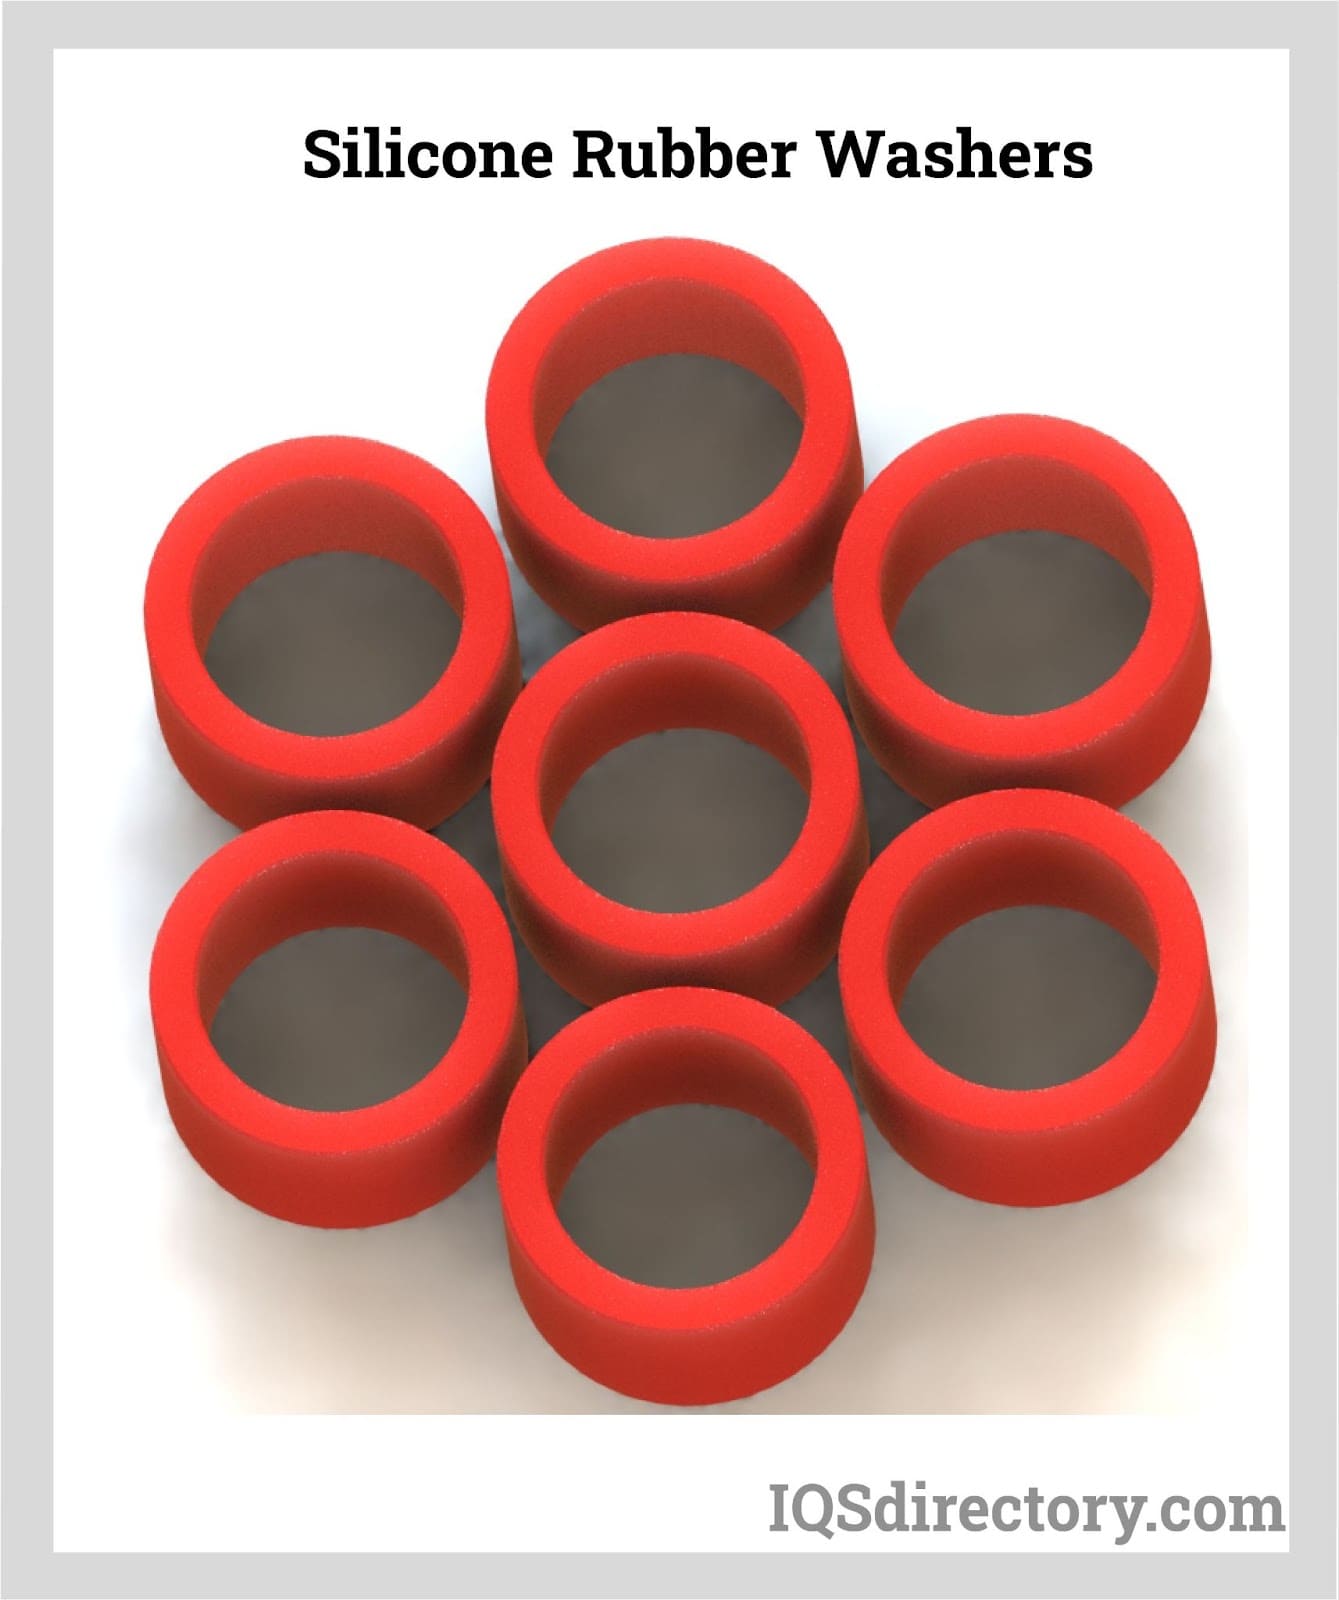 silicone rubber washers